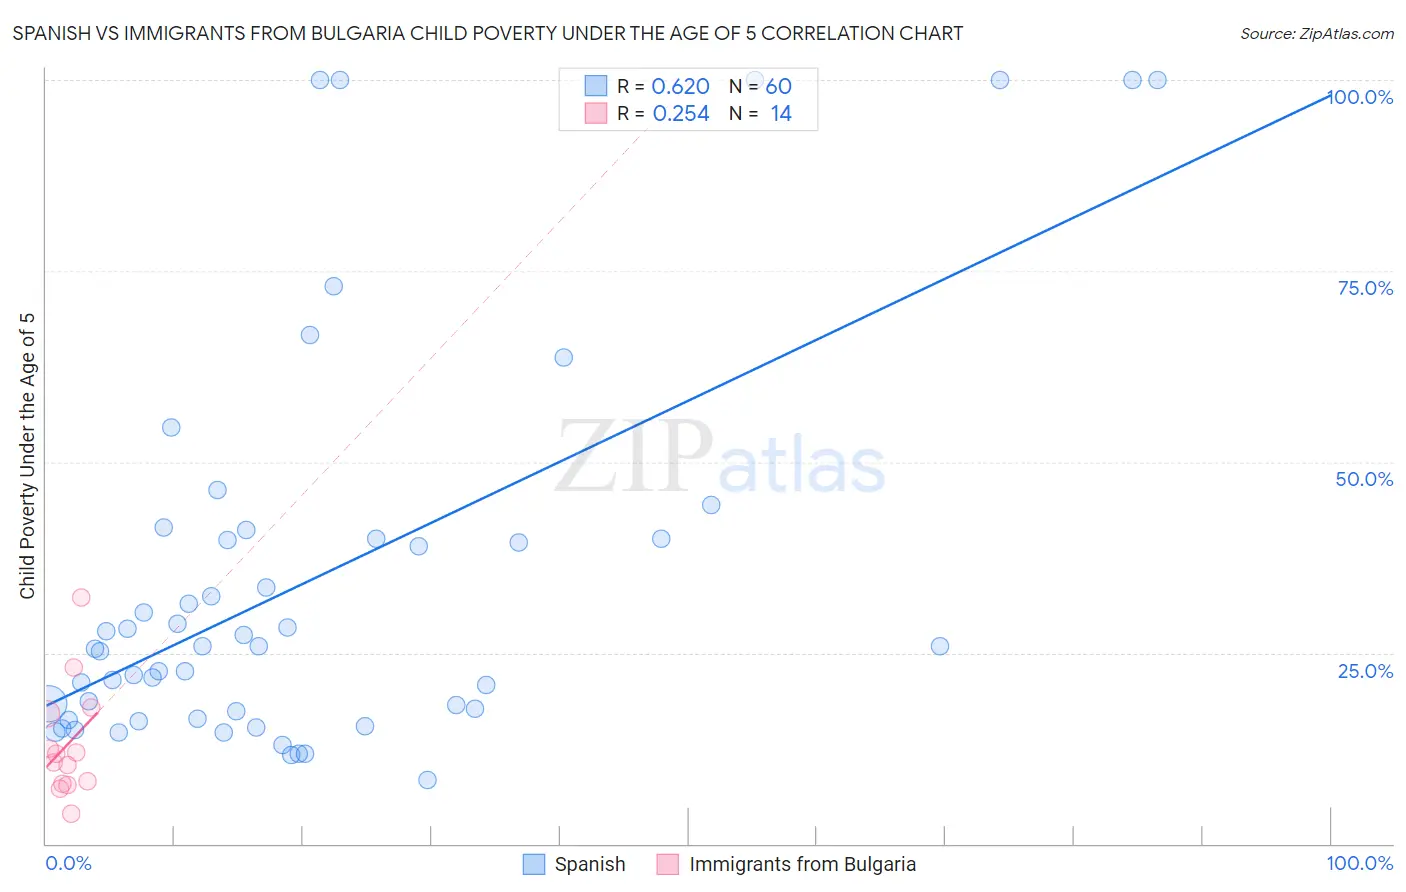 Spanish vs Immigrants from Bulgaria Child Poverty Under the Age of 5